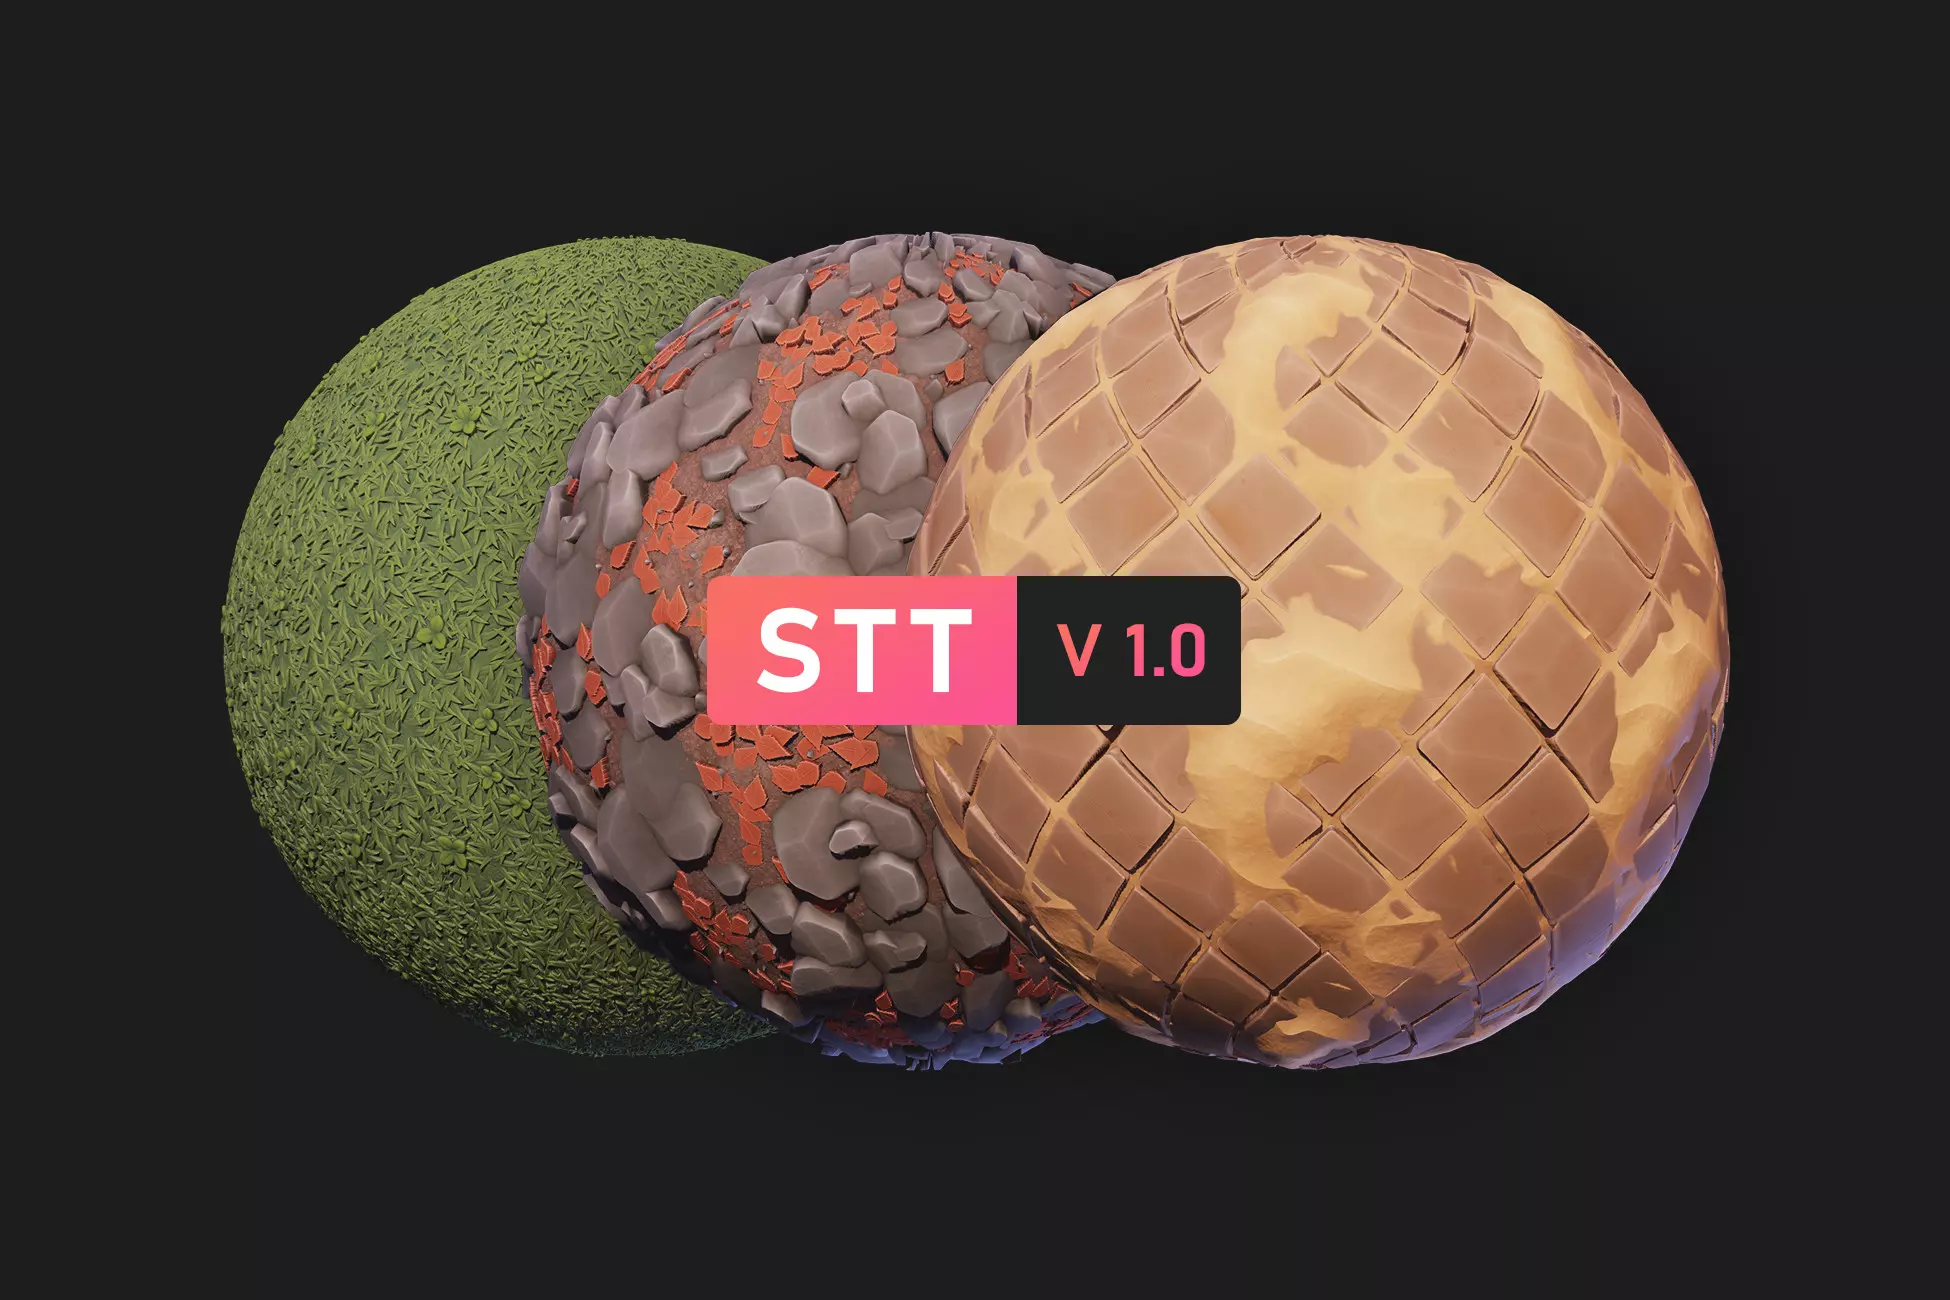 Distribution of the Stylized Terrain Textures asset 50 landscape textures on the Unity asset store - Longpost, Asset, Инди, Distribution, Development of, Gamedev, Indie game, Unity3d, Unity, Asset store